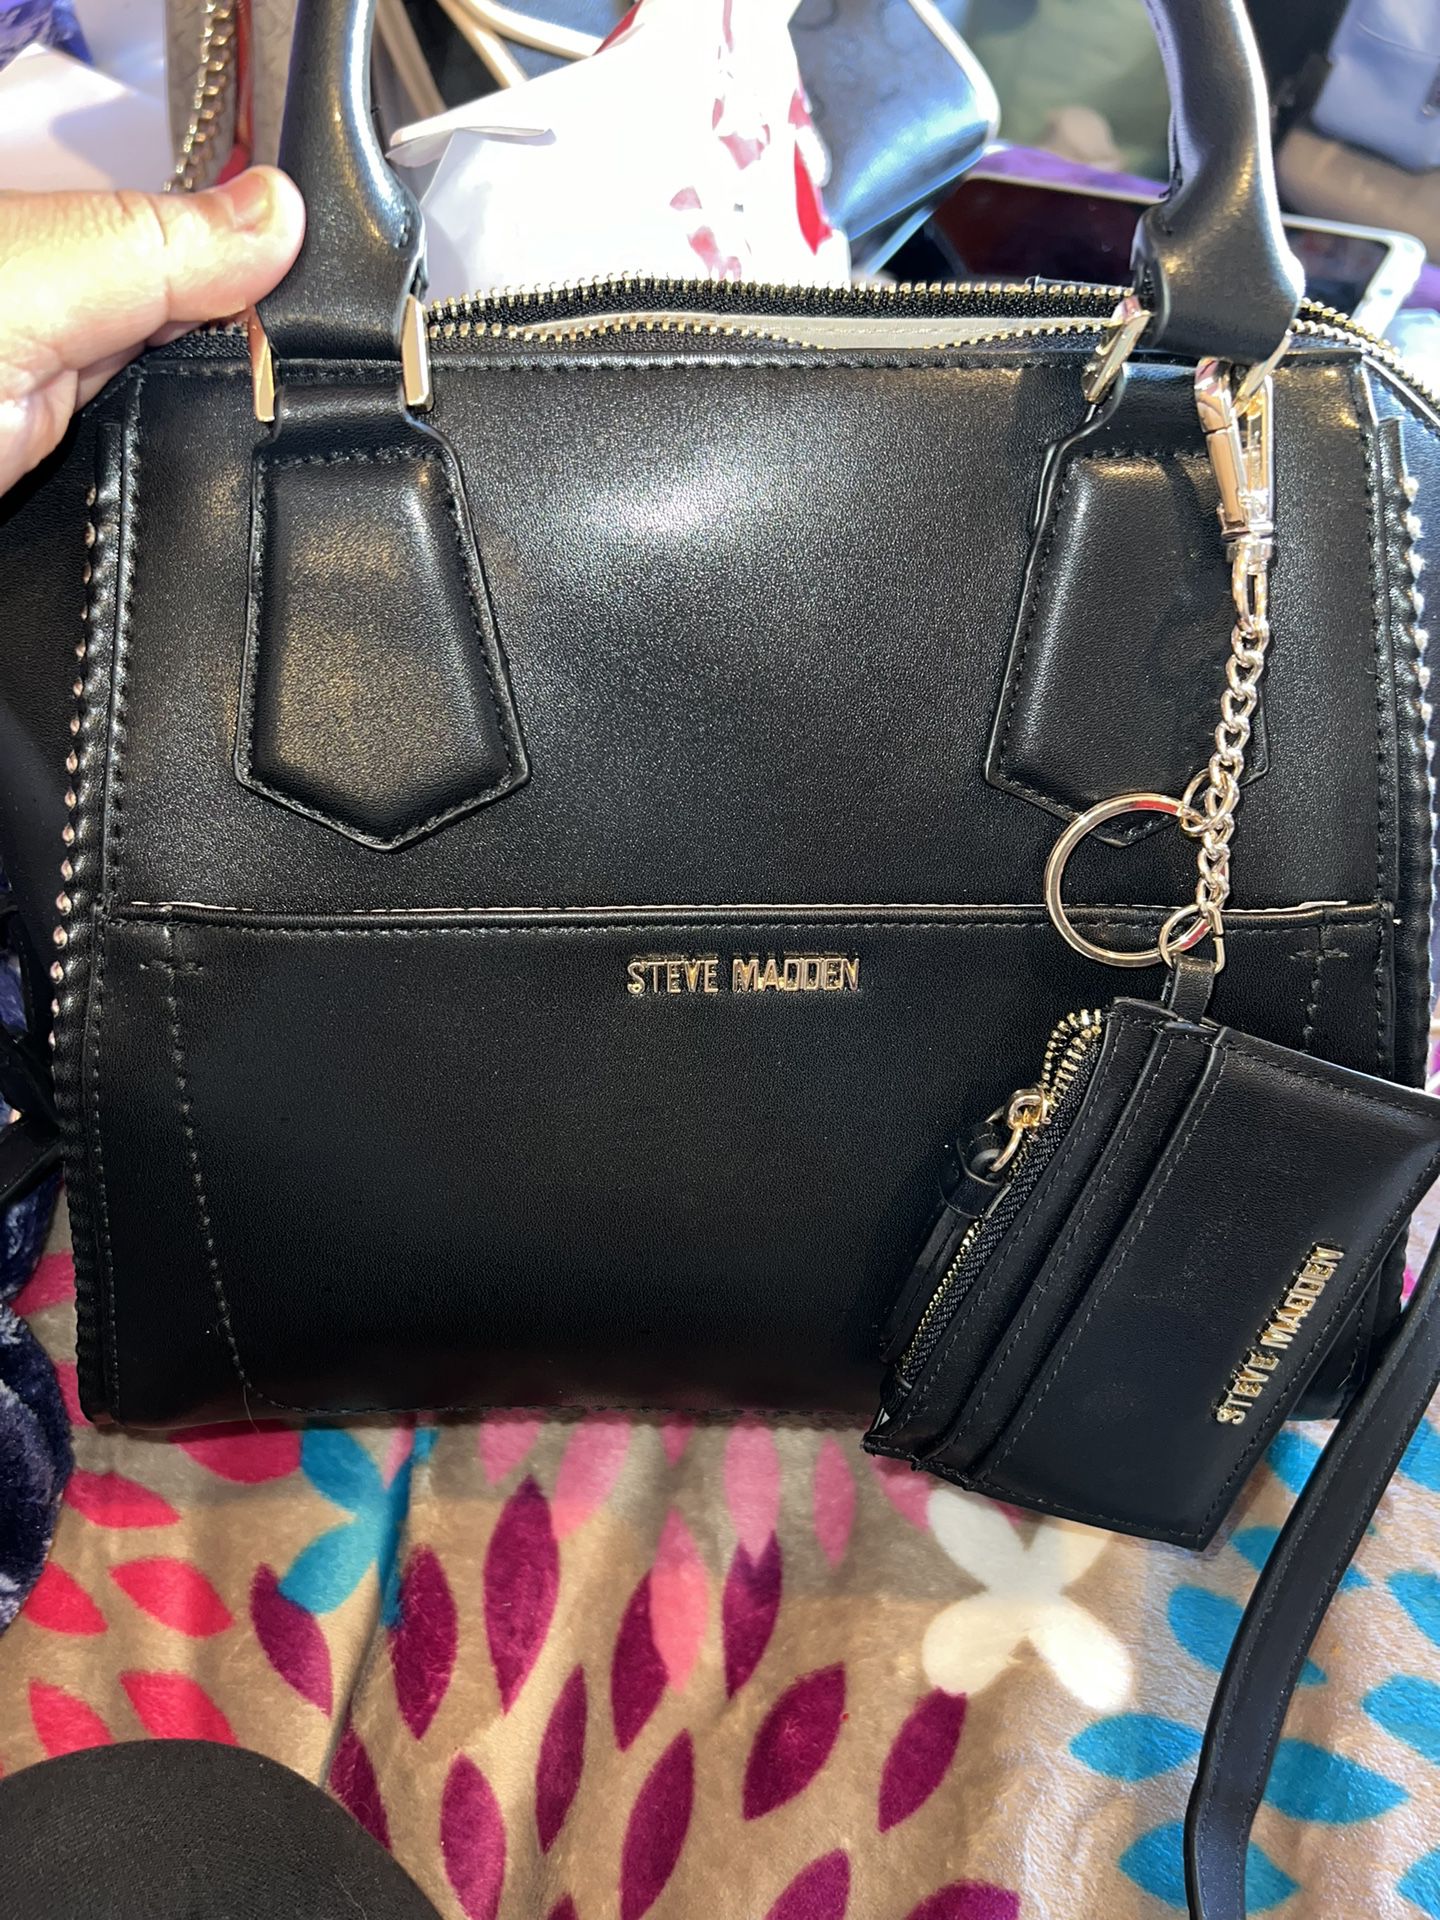 Steve Madden Tote Bag With Wallet Attached